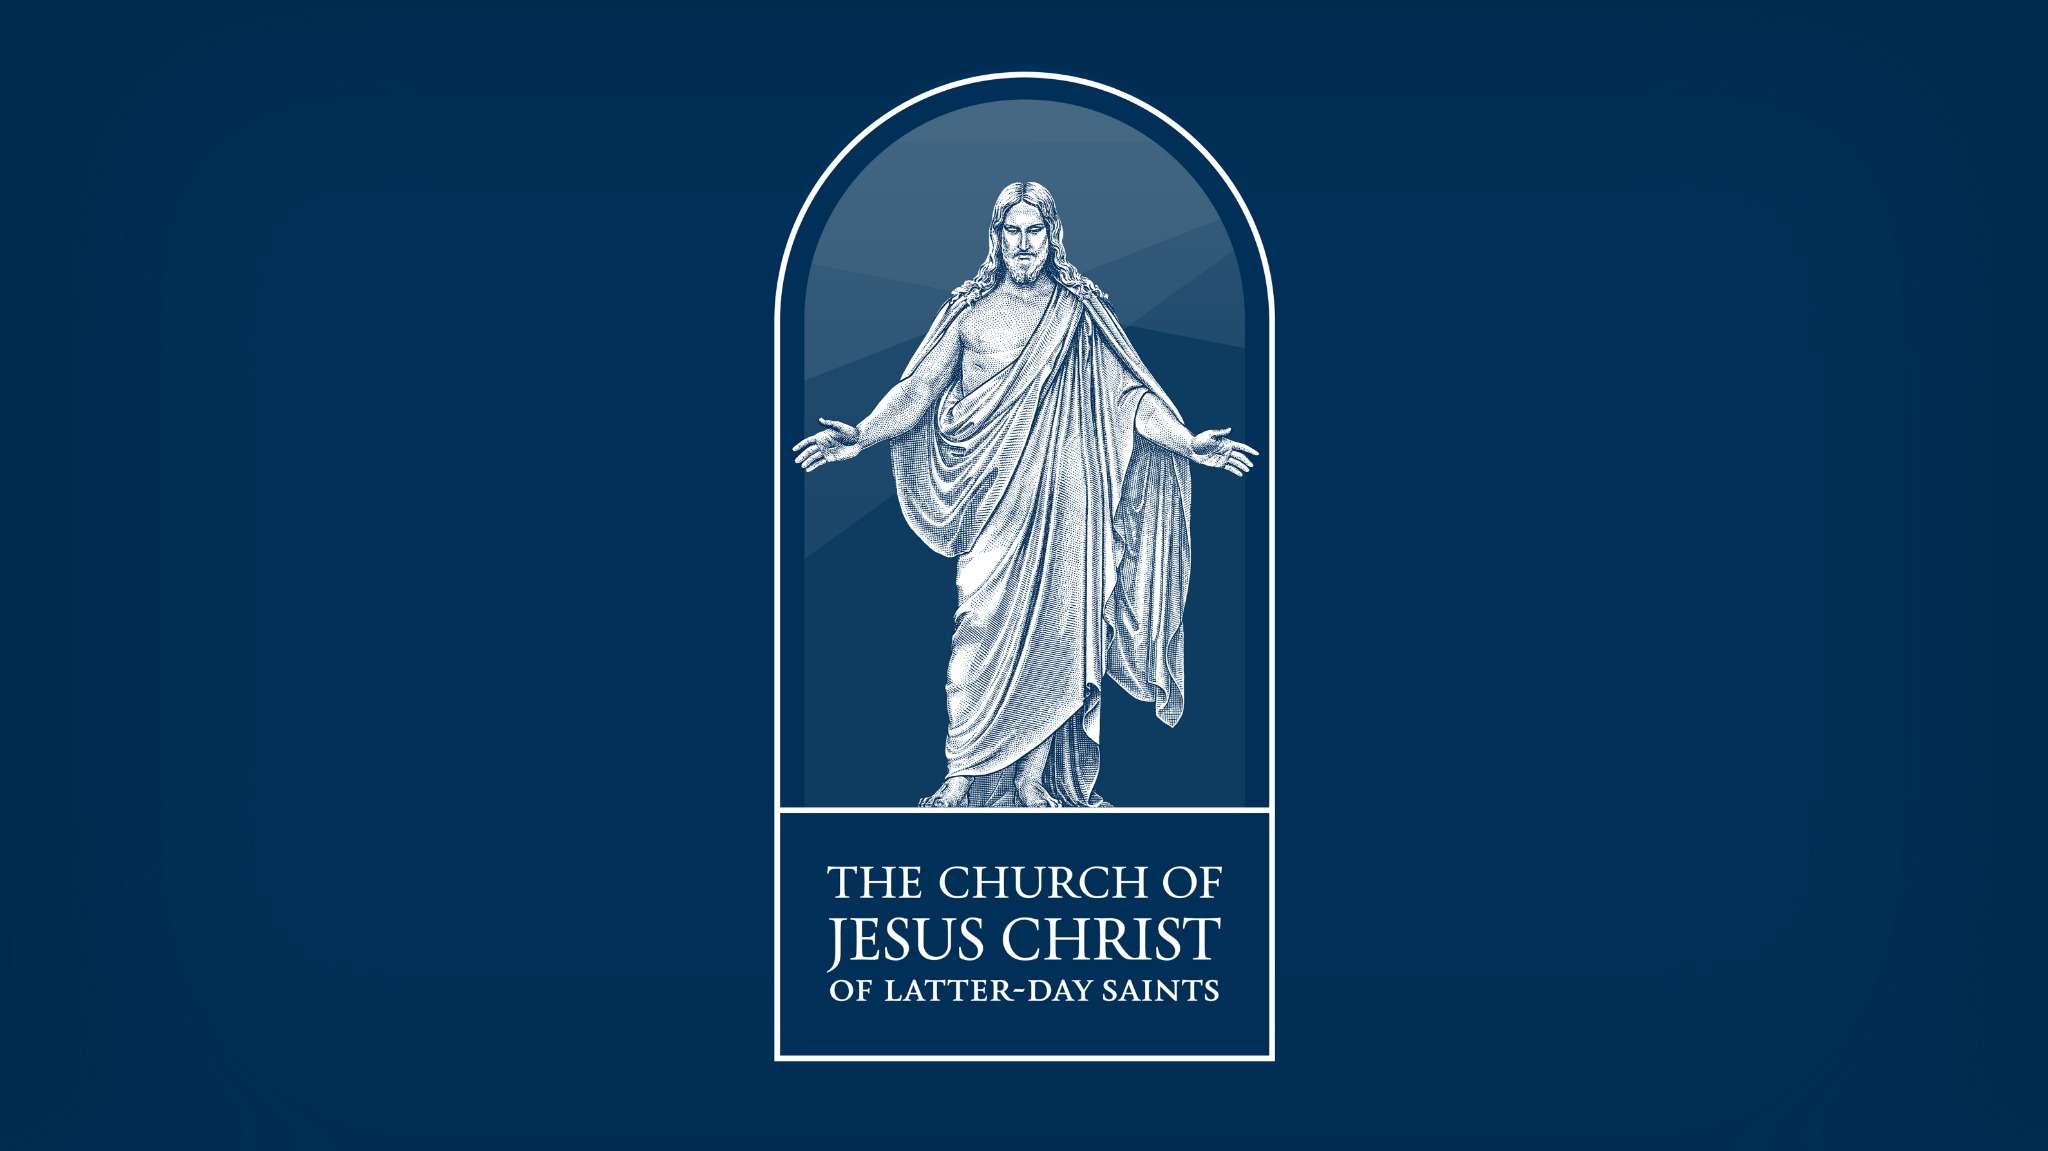 LDS church unveils new logo, announces first temple in China at Global ...